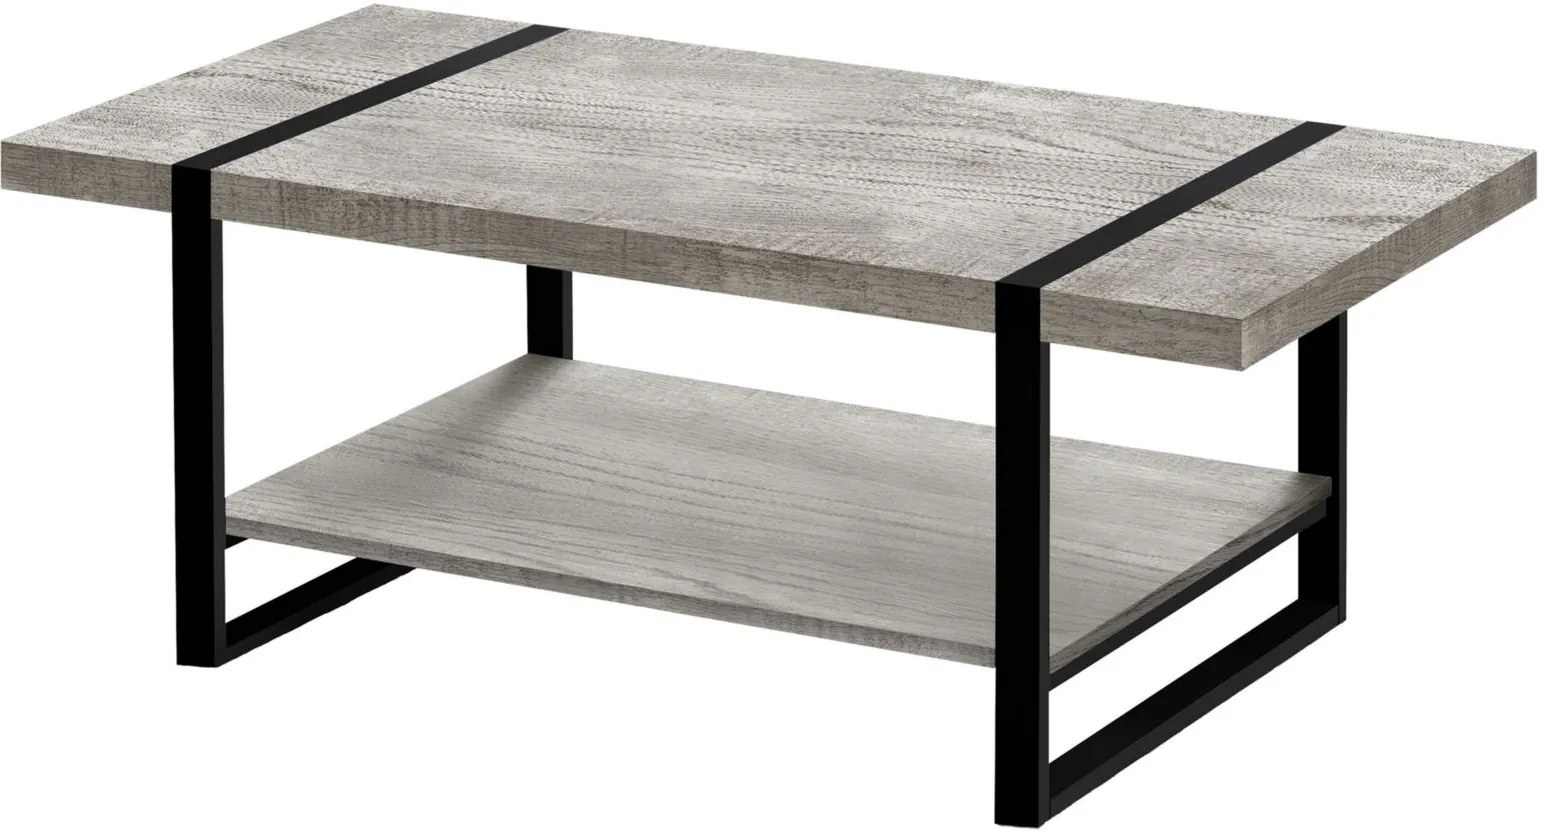 Jodie Rectangular Coffee Table in Gray by Monarch Specialties